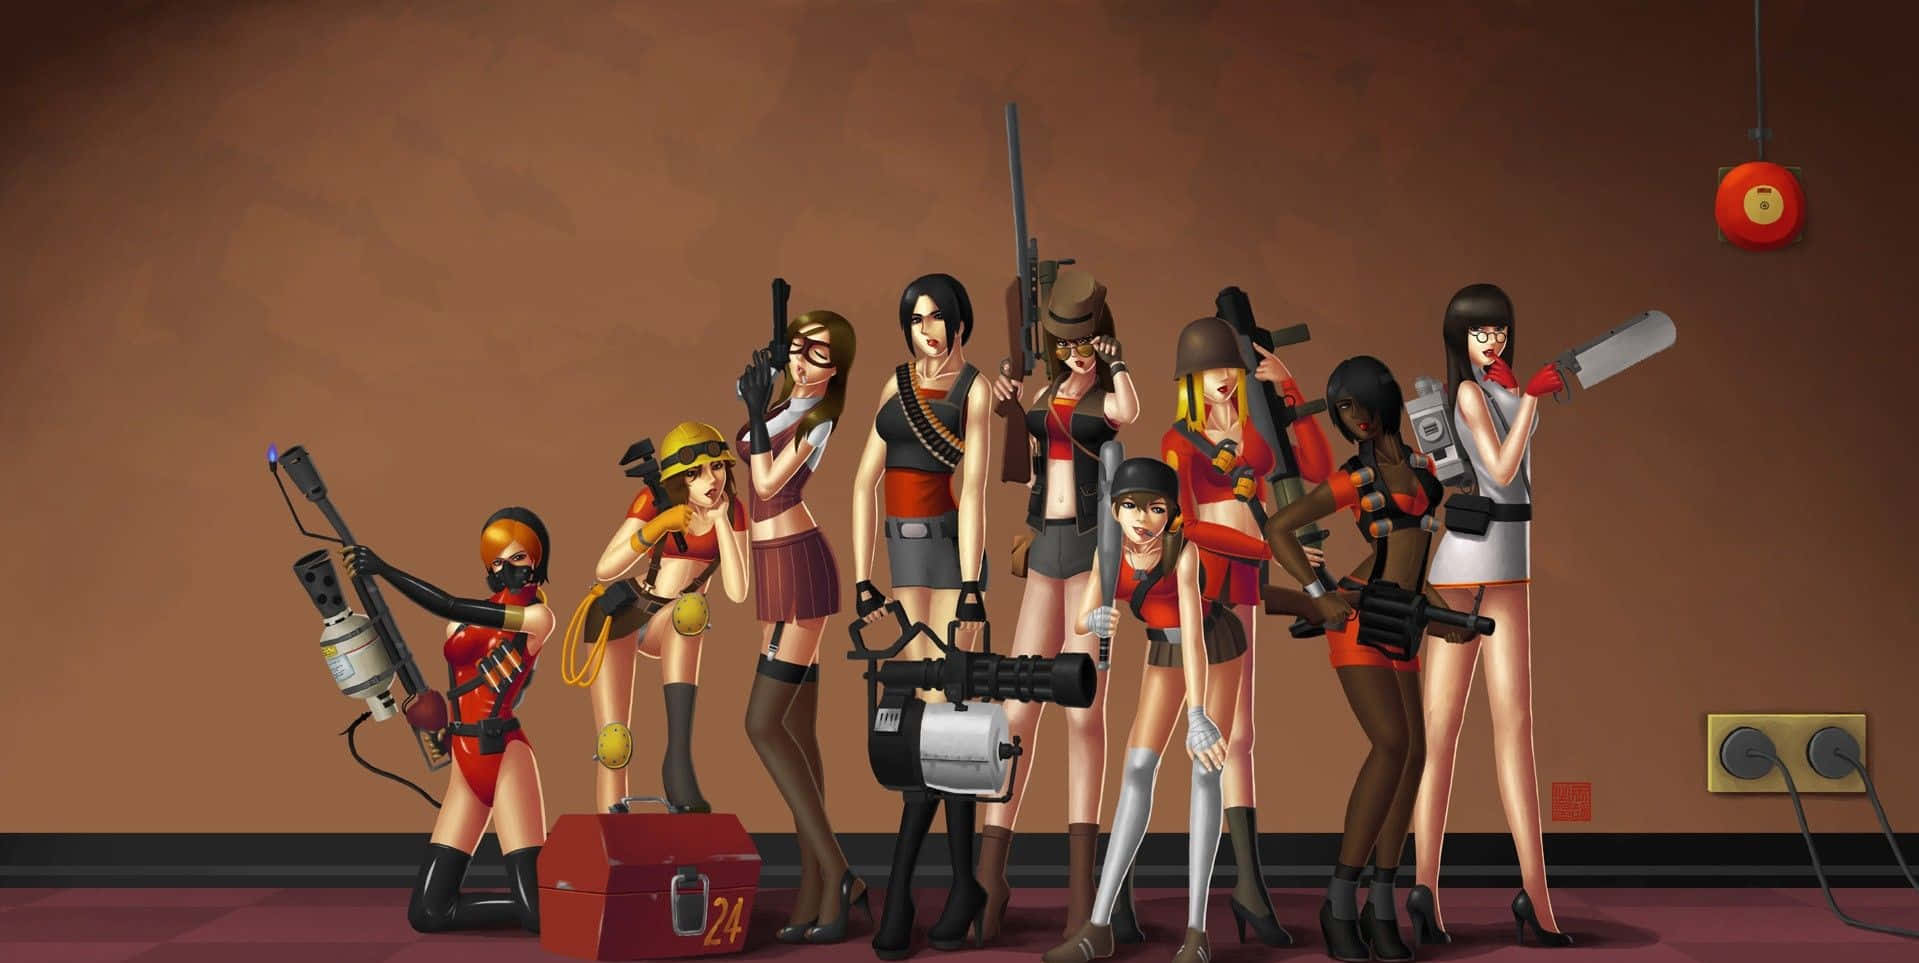 Caption: Meet the Team - Team Fortress 2 Characters Group Pose Wallpaper